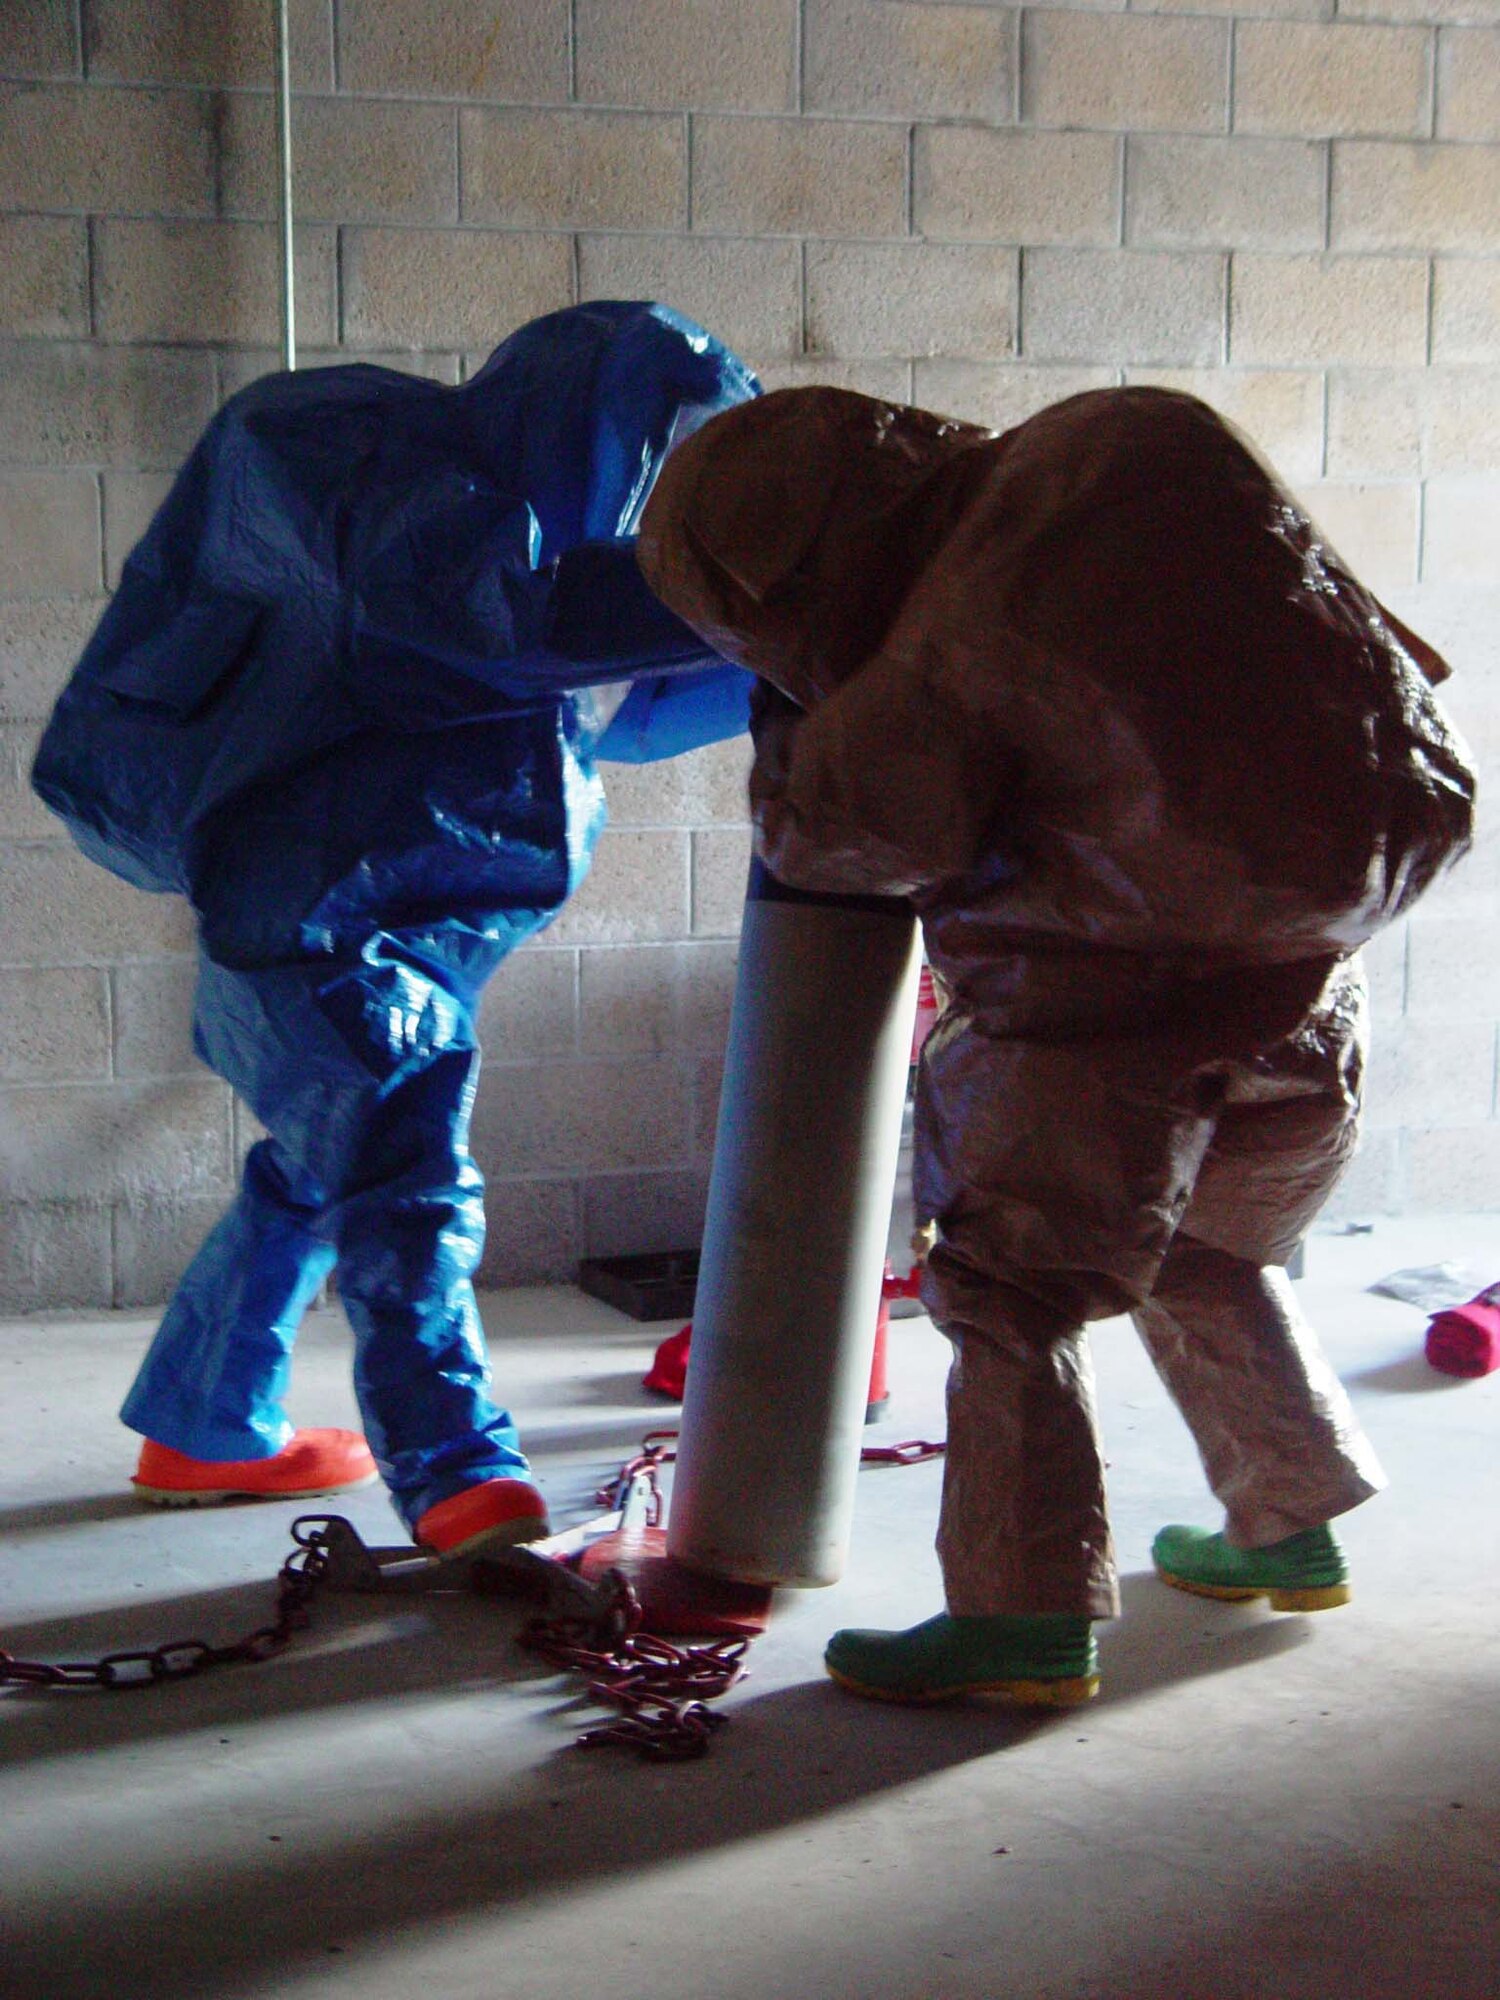 Firefighters from the 482nd Civil Engineering Squadron prepare to cap a simulated chlorine leak during hazardous materials training at Homestead Air Reserve Base, Fla. on June 9. Members of the base fire department train several times a year while wearing chemical and biological protective suits. The firefighters had 20 minutes from the initial call to contain the leak.  (US Air Force photo by Lisa Macias)                       